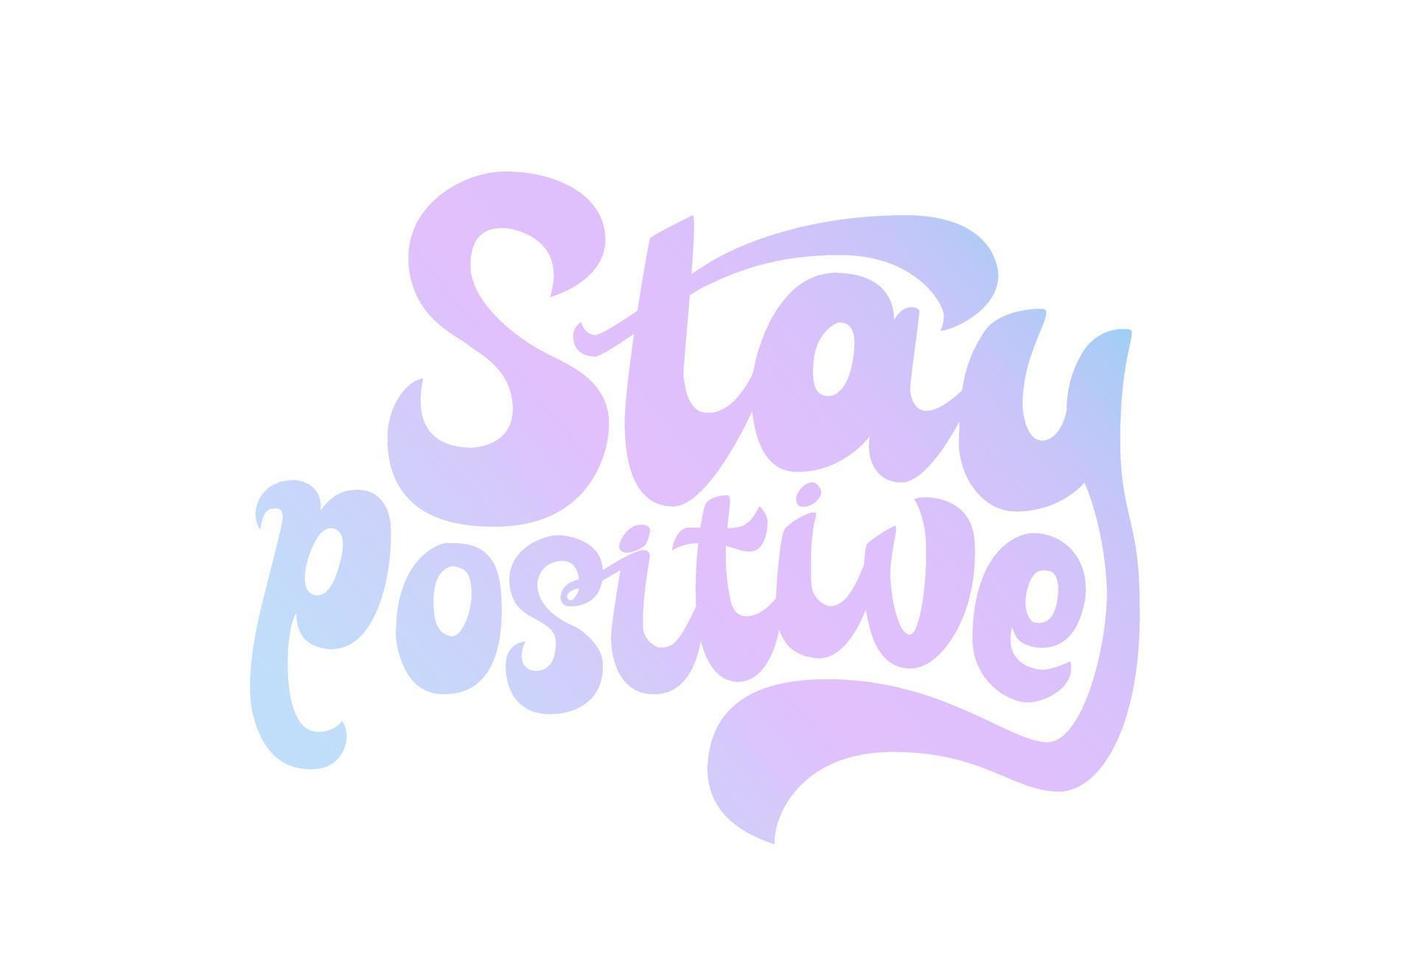 Stay positive hand drawn lettering quote with gradient. Inspirational poster. Supportive message. Vector illustration design. Use for prints, postcards, banners, pins, social media post.